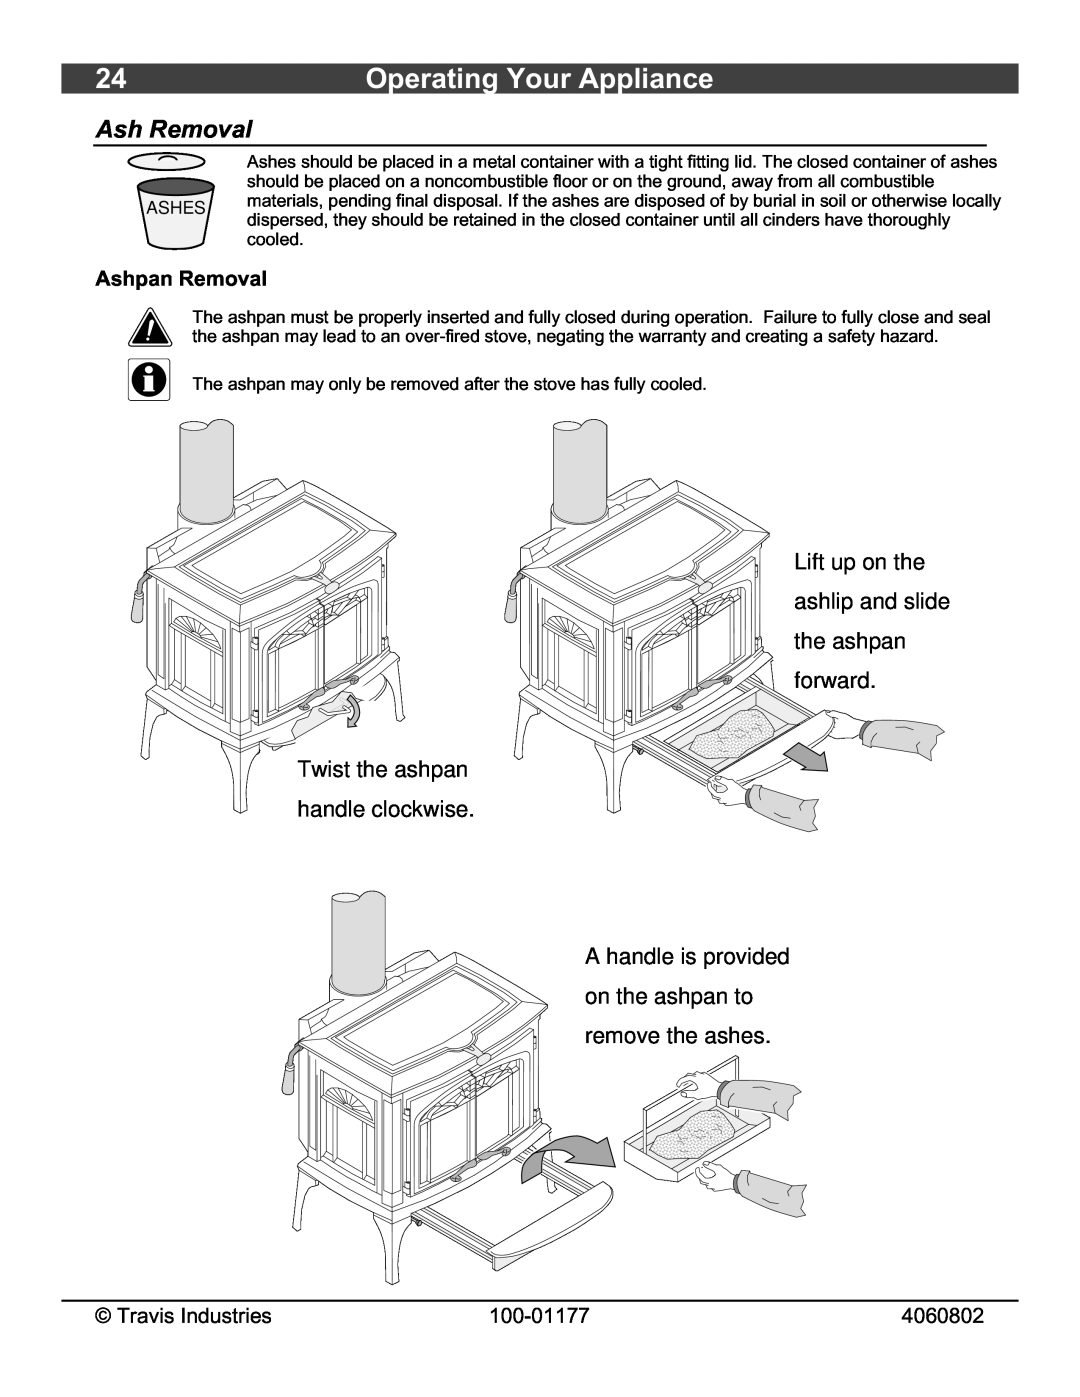 Lopi Stove owner manual Operating Your Appliance, Ash Removal, Lift up on the ashlip and slide the ashpan, remove the ashes 